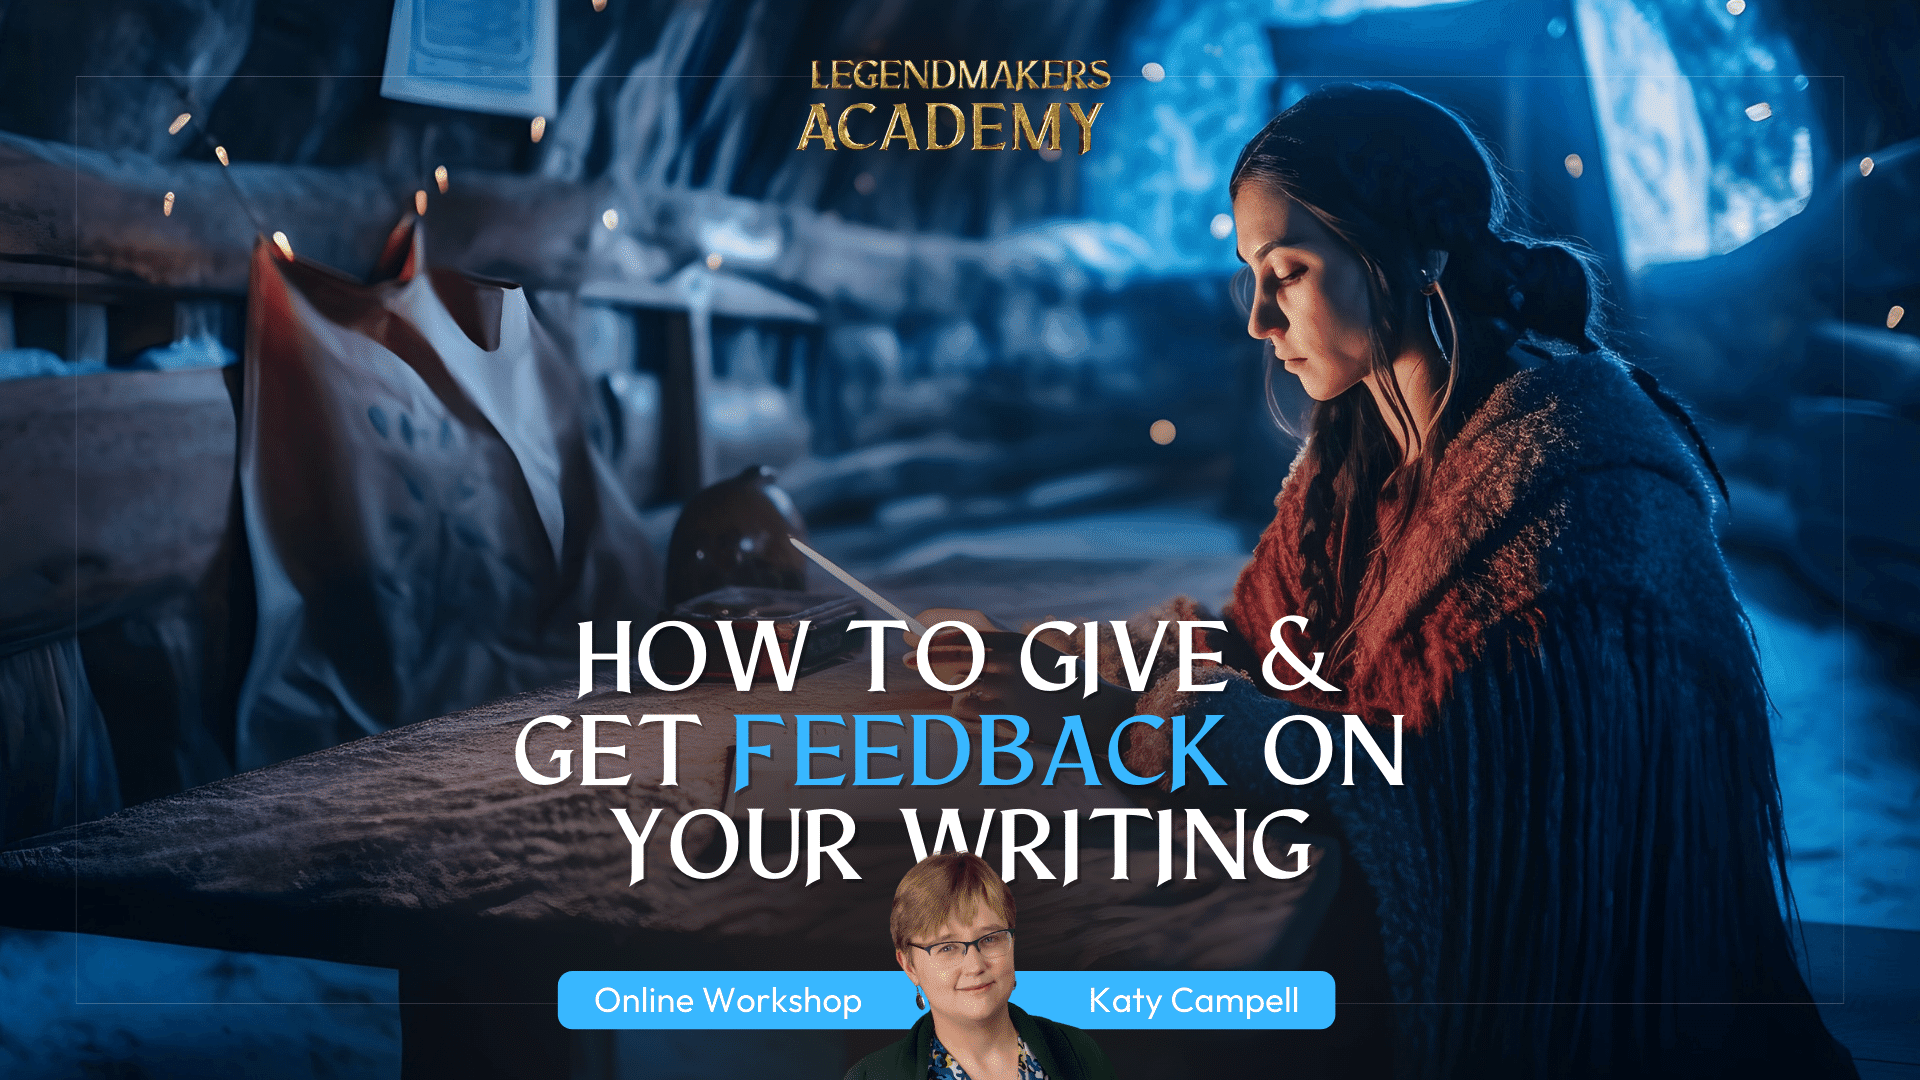 Constructive Criticism Made Easy? How to Give & Get Feedback on Your Writing | Workshop with Katy Campbell